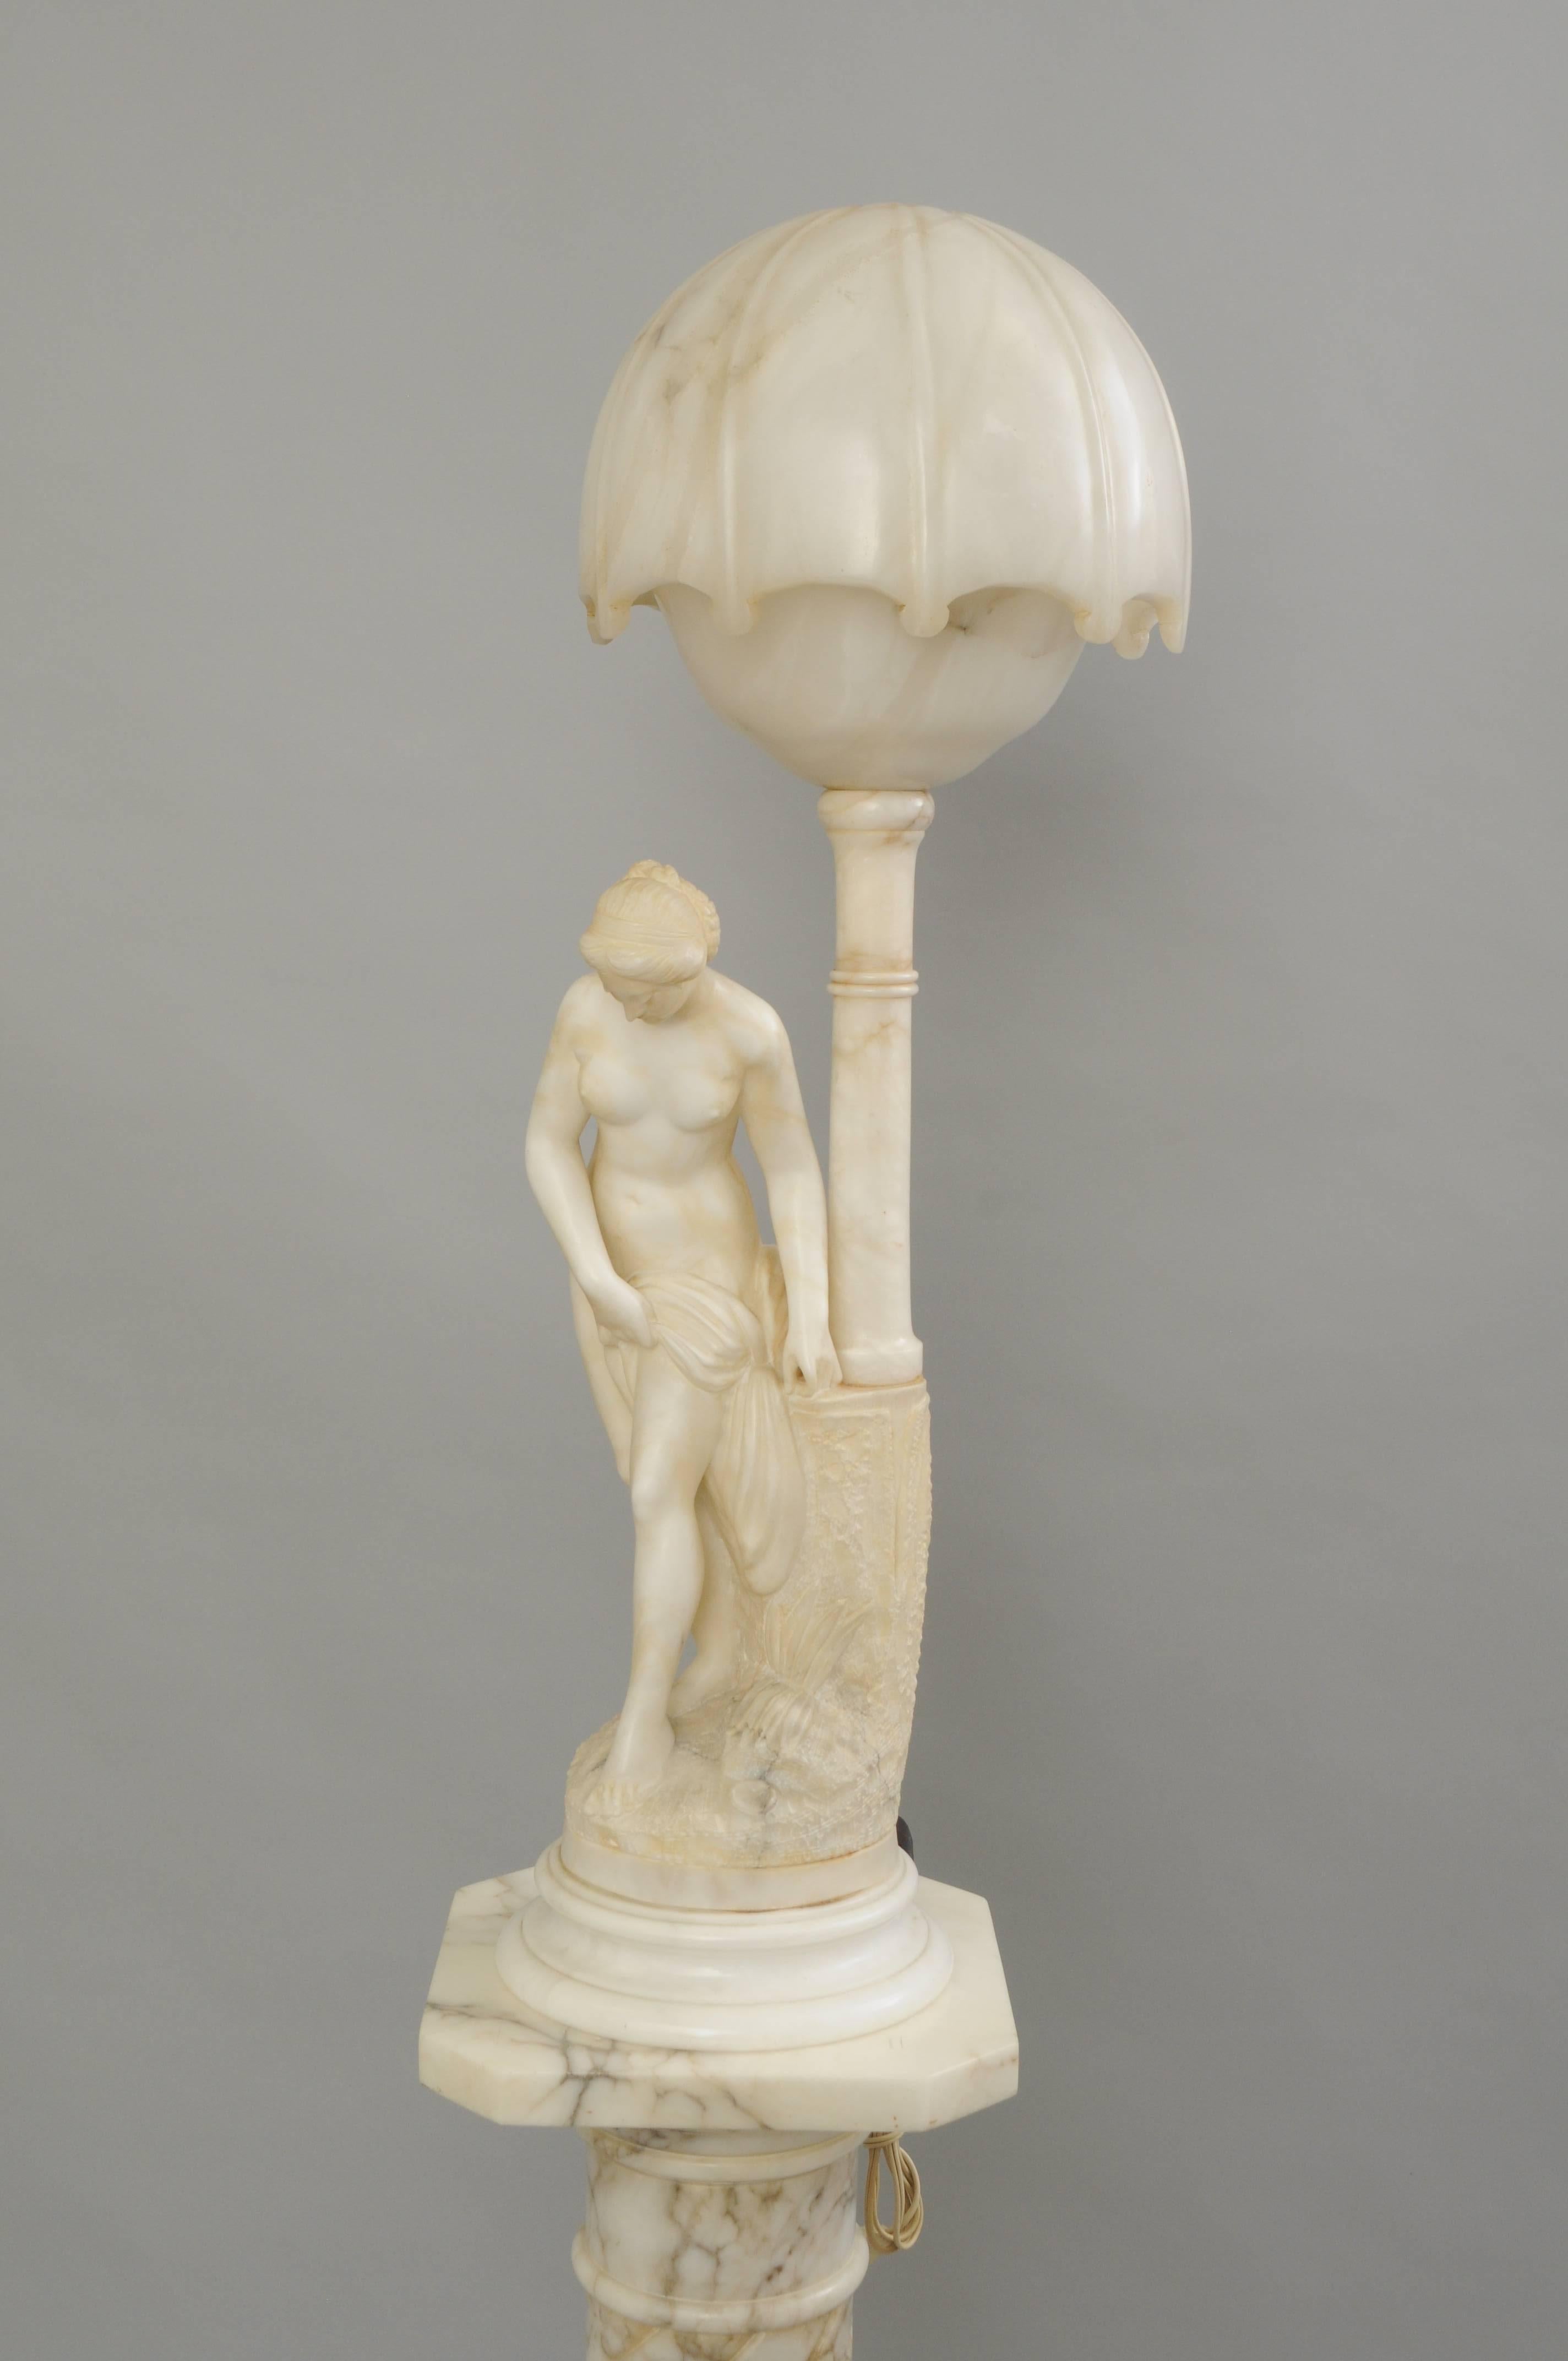 Impressive figural marble and alabaster orientalist lamp and pedestal with signature. Item features a carved marble and alabaster figure of a nude gypsy woman standing under a street lamp with illuminating single socket fixture. The lamp rests on a